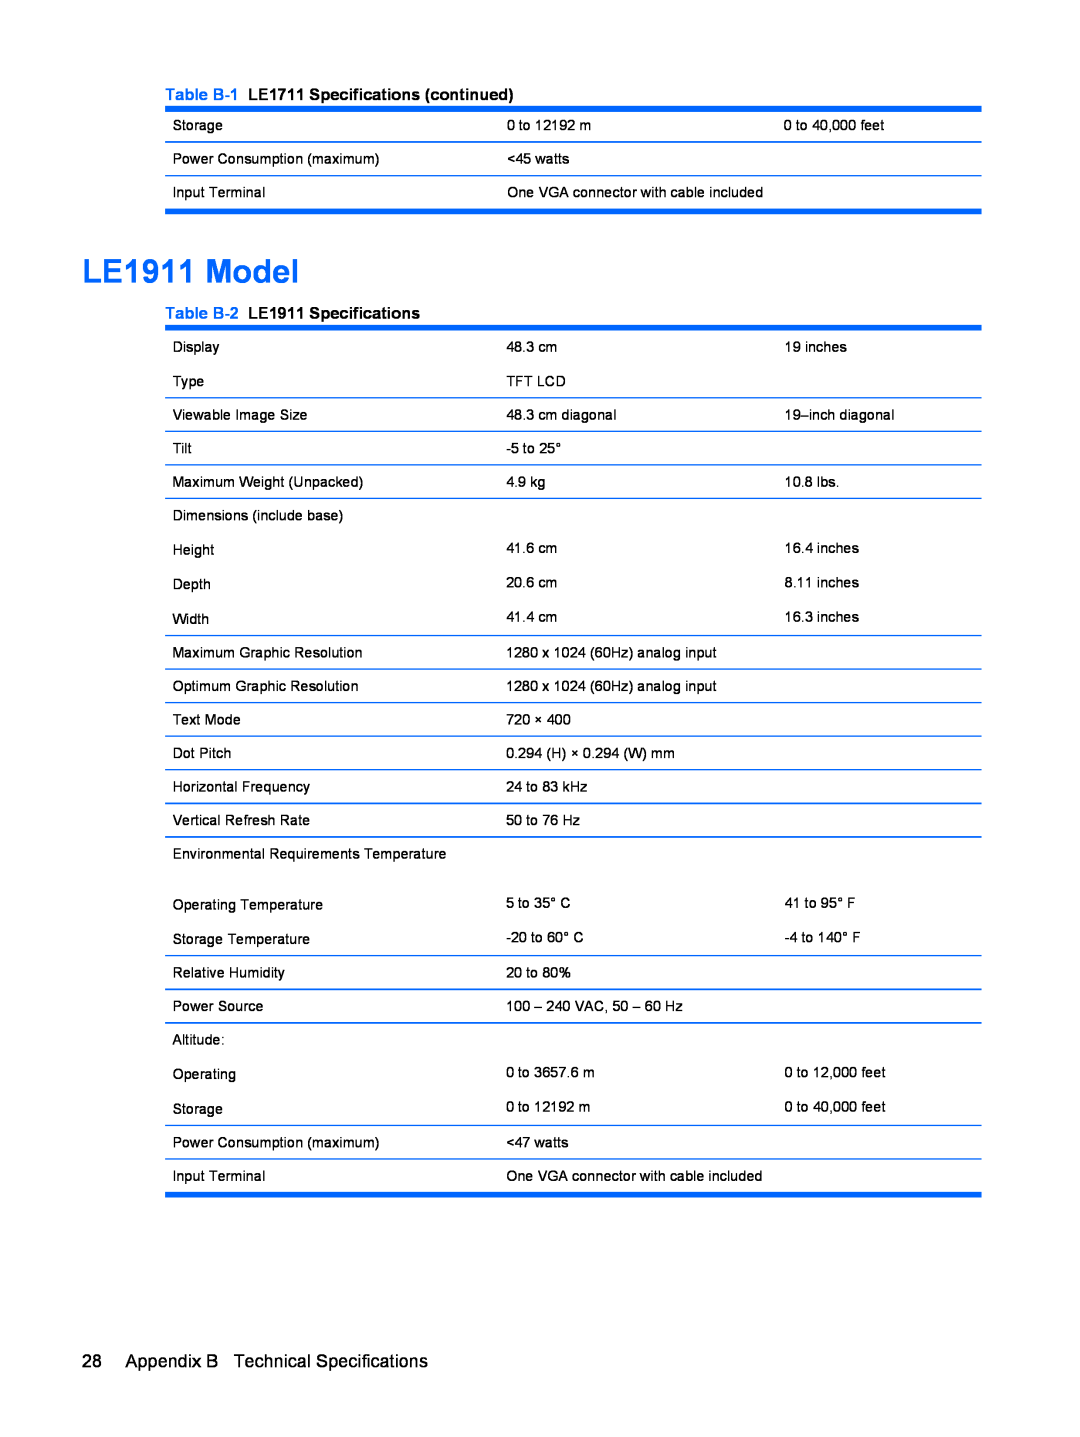 HP LE1711 17-inch manual LE1911 Model, Appendix B Technical Specifications, Table B-1 LE1711 Specifications continued 